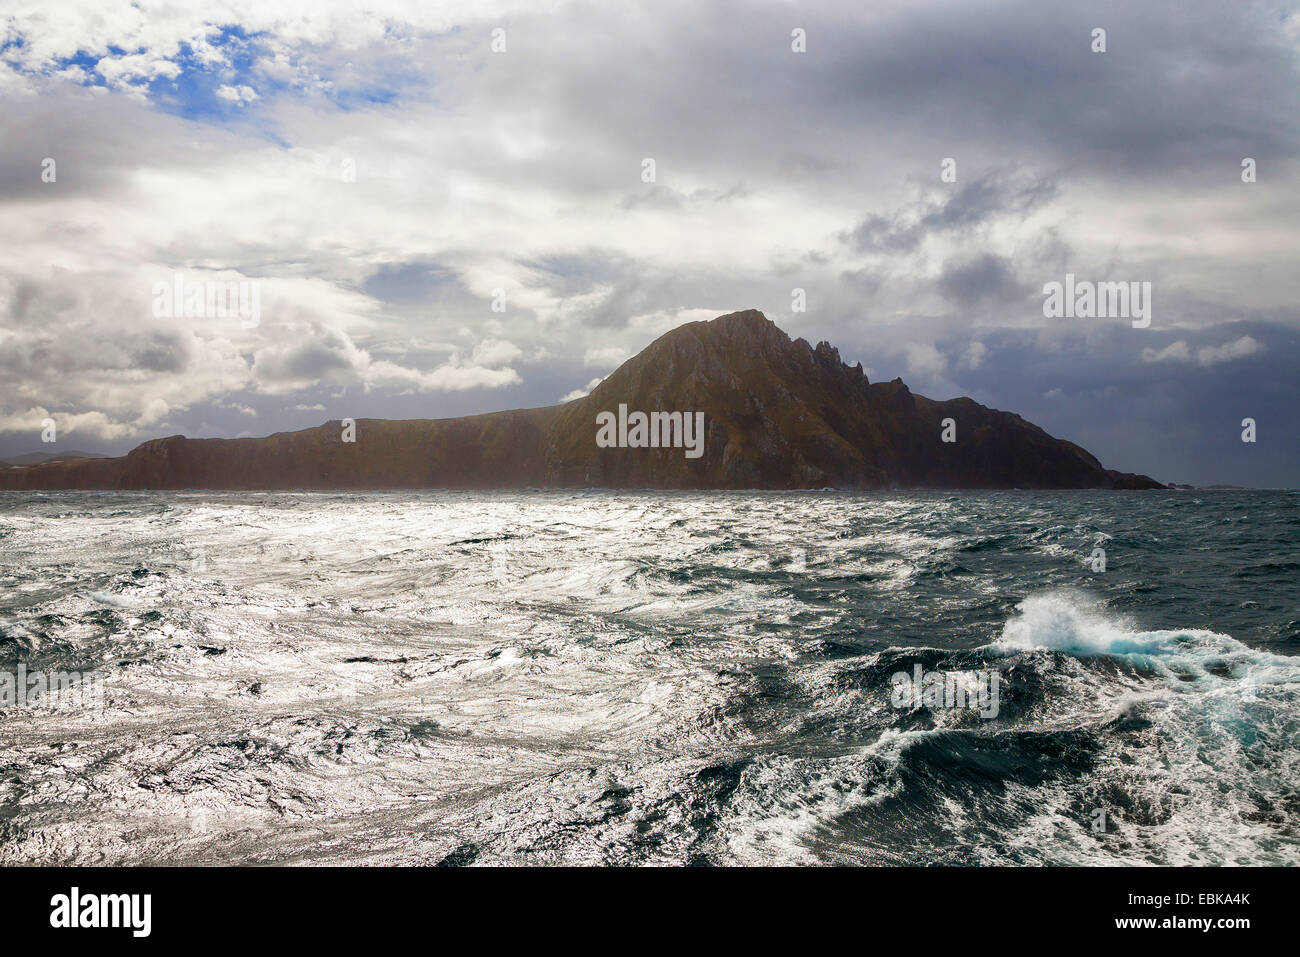 Mare mosso a Capo Horn, Cile, Capo Horn Island, Capo Hoorn National Park Foto Stock